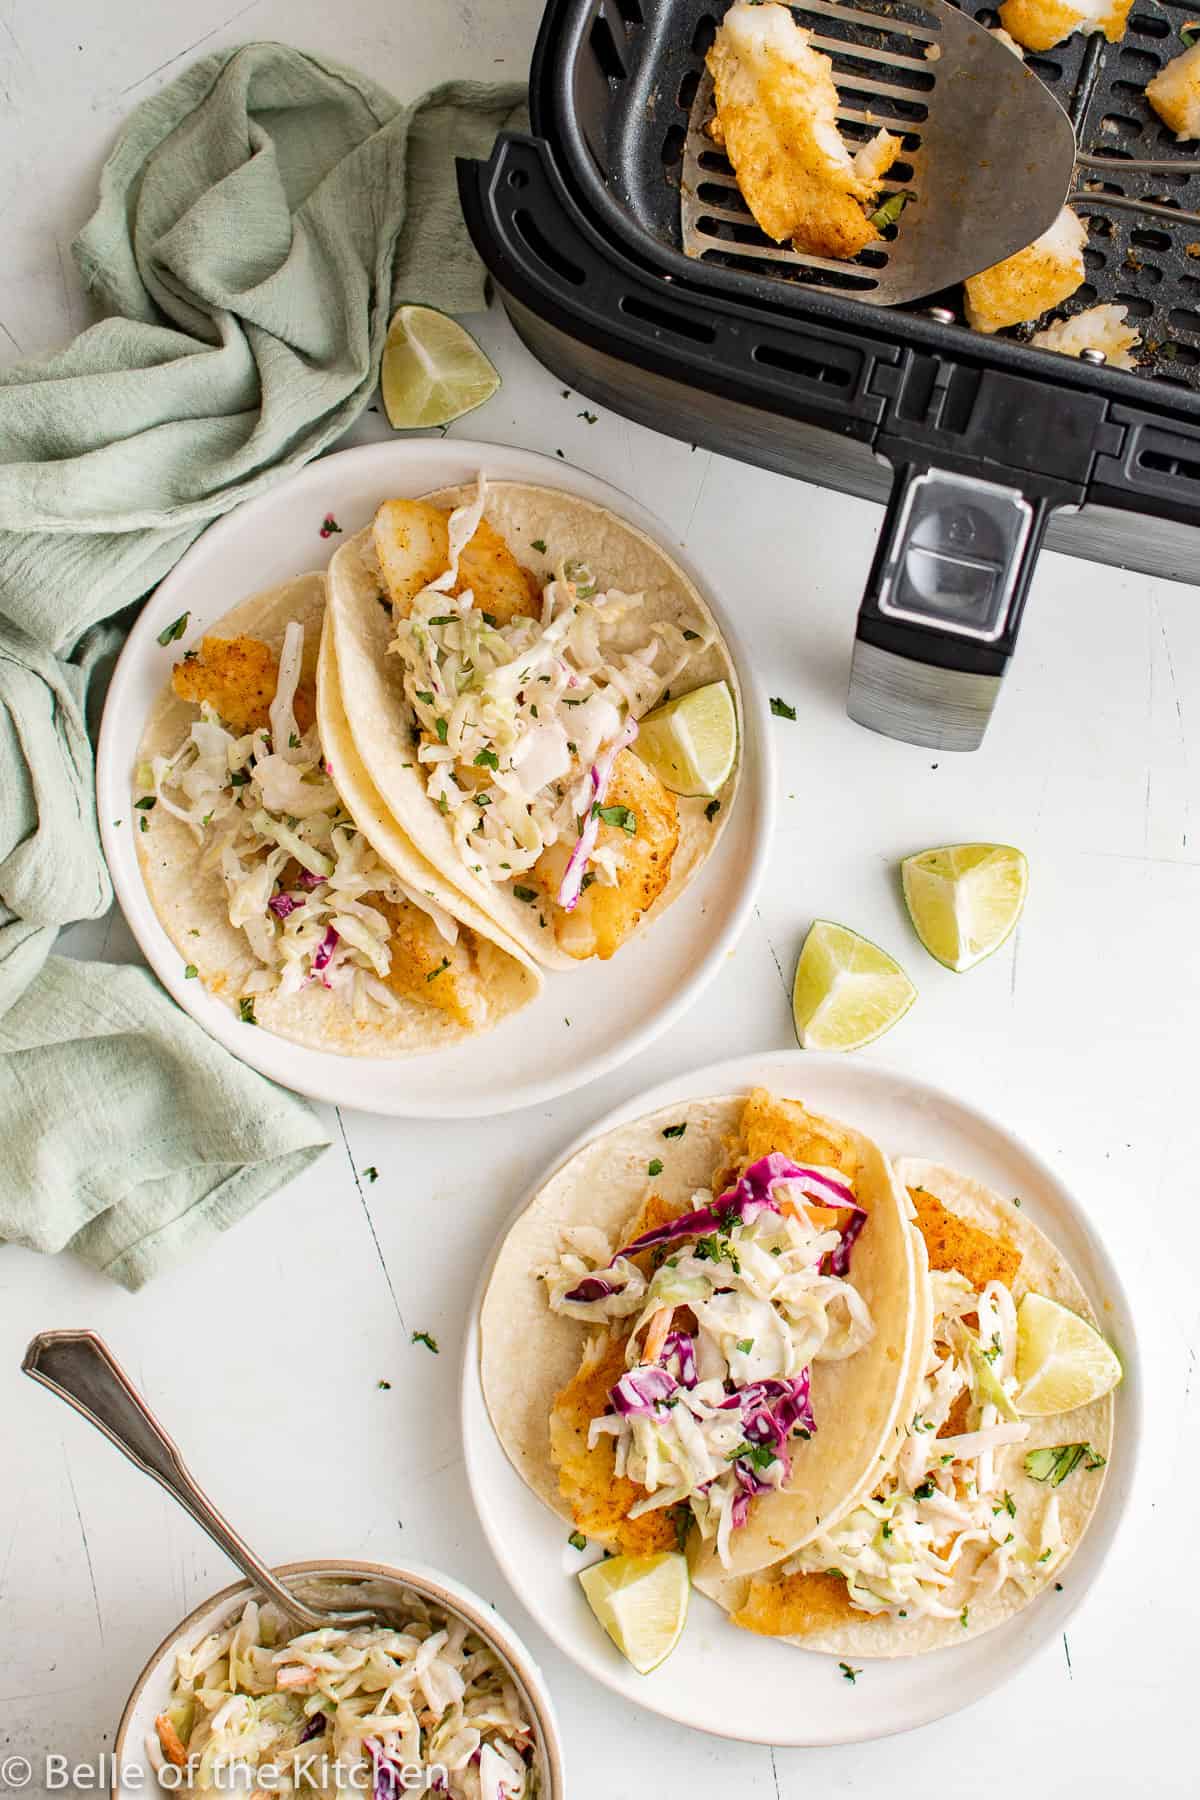 fish tacos on plates next to an air fryer basket.